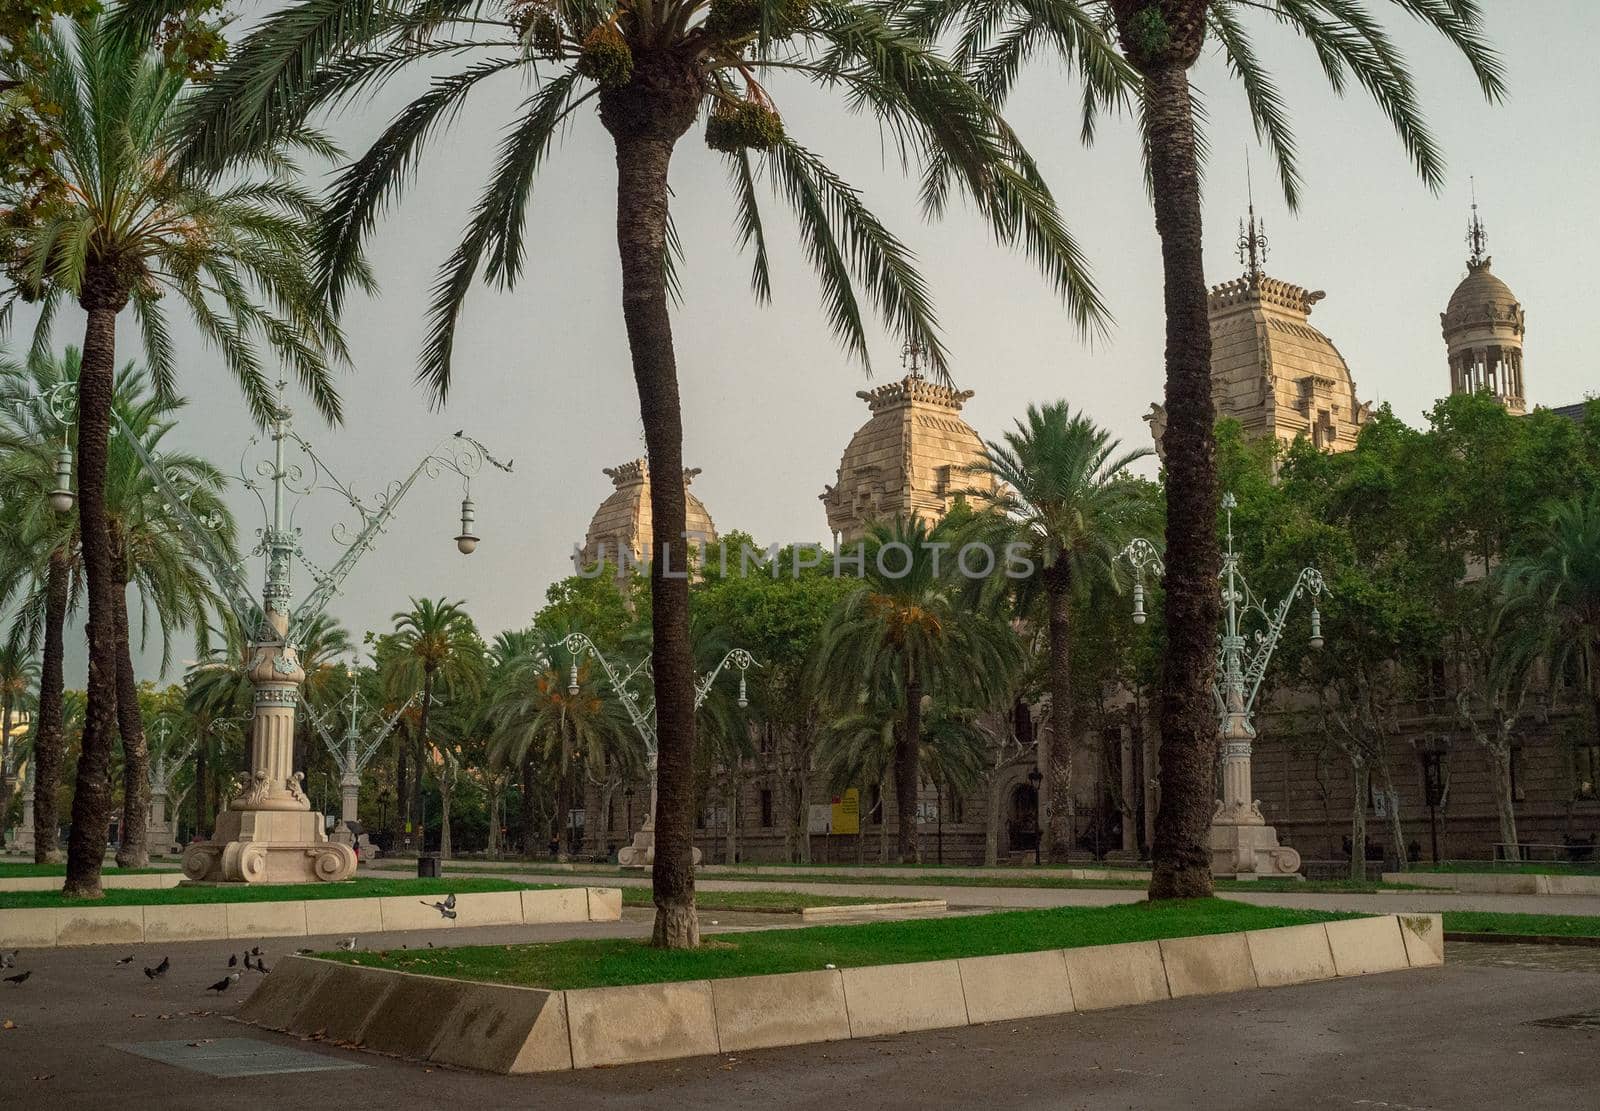 September 8, 2014, Barcelona, Spain. Palm trees in the park at Passeig de Lluis Companys in the capital of Catalonia